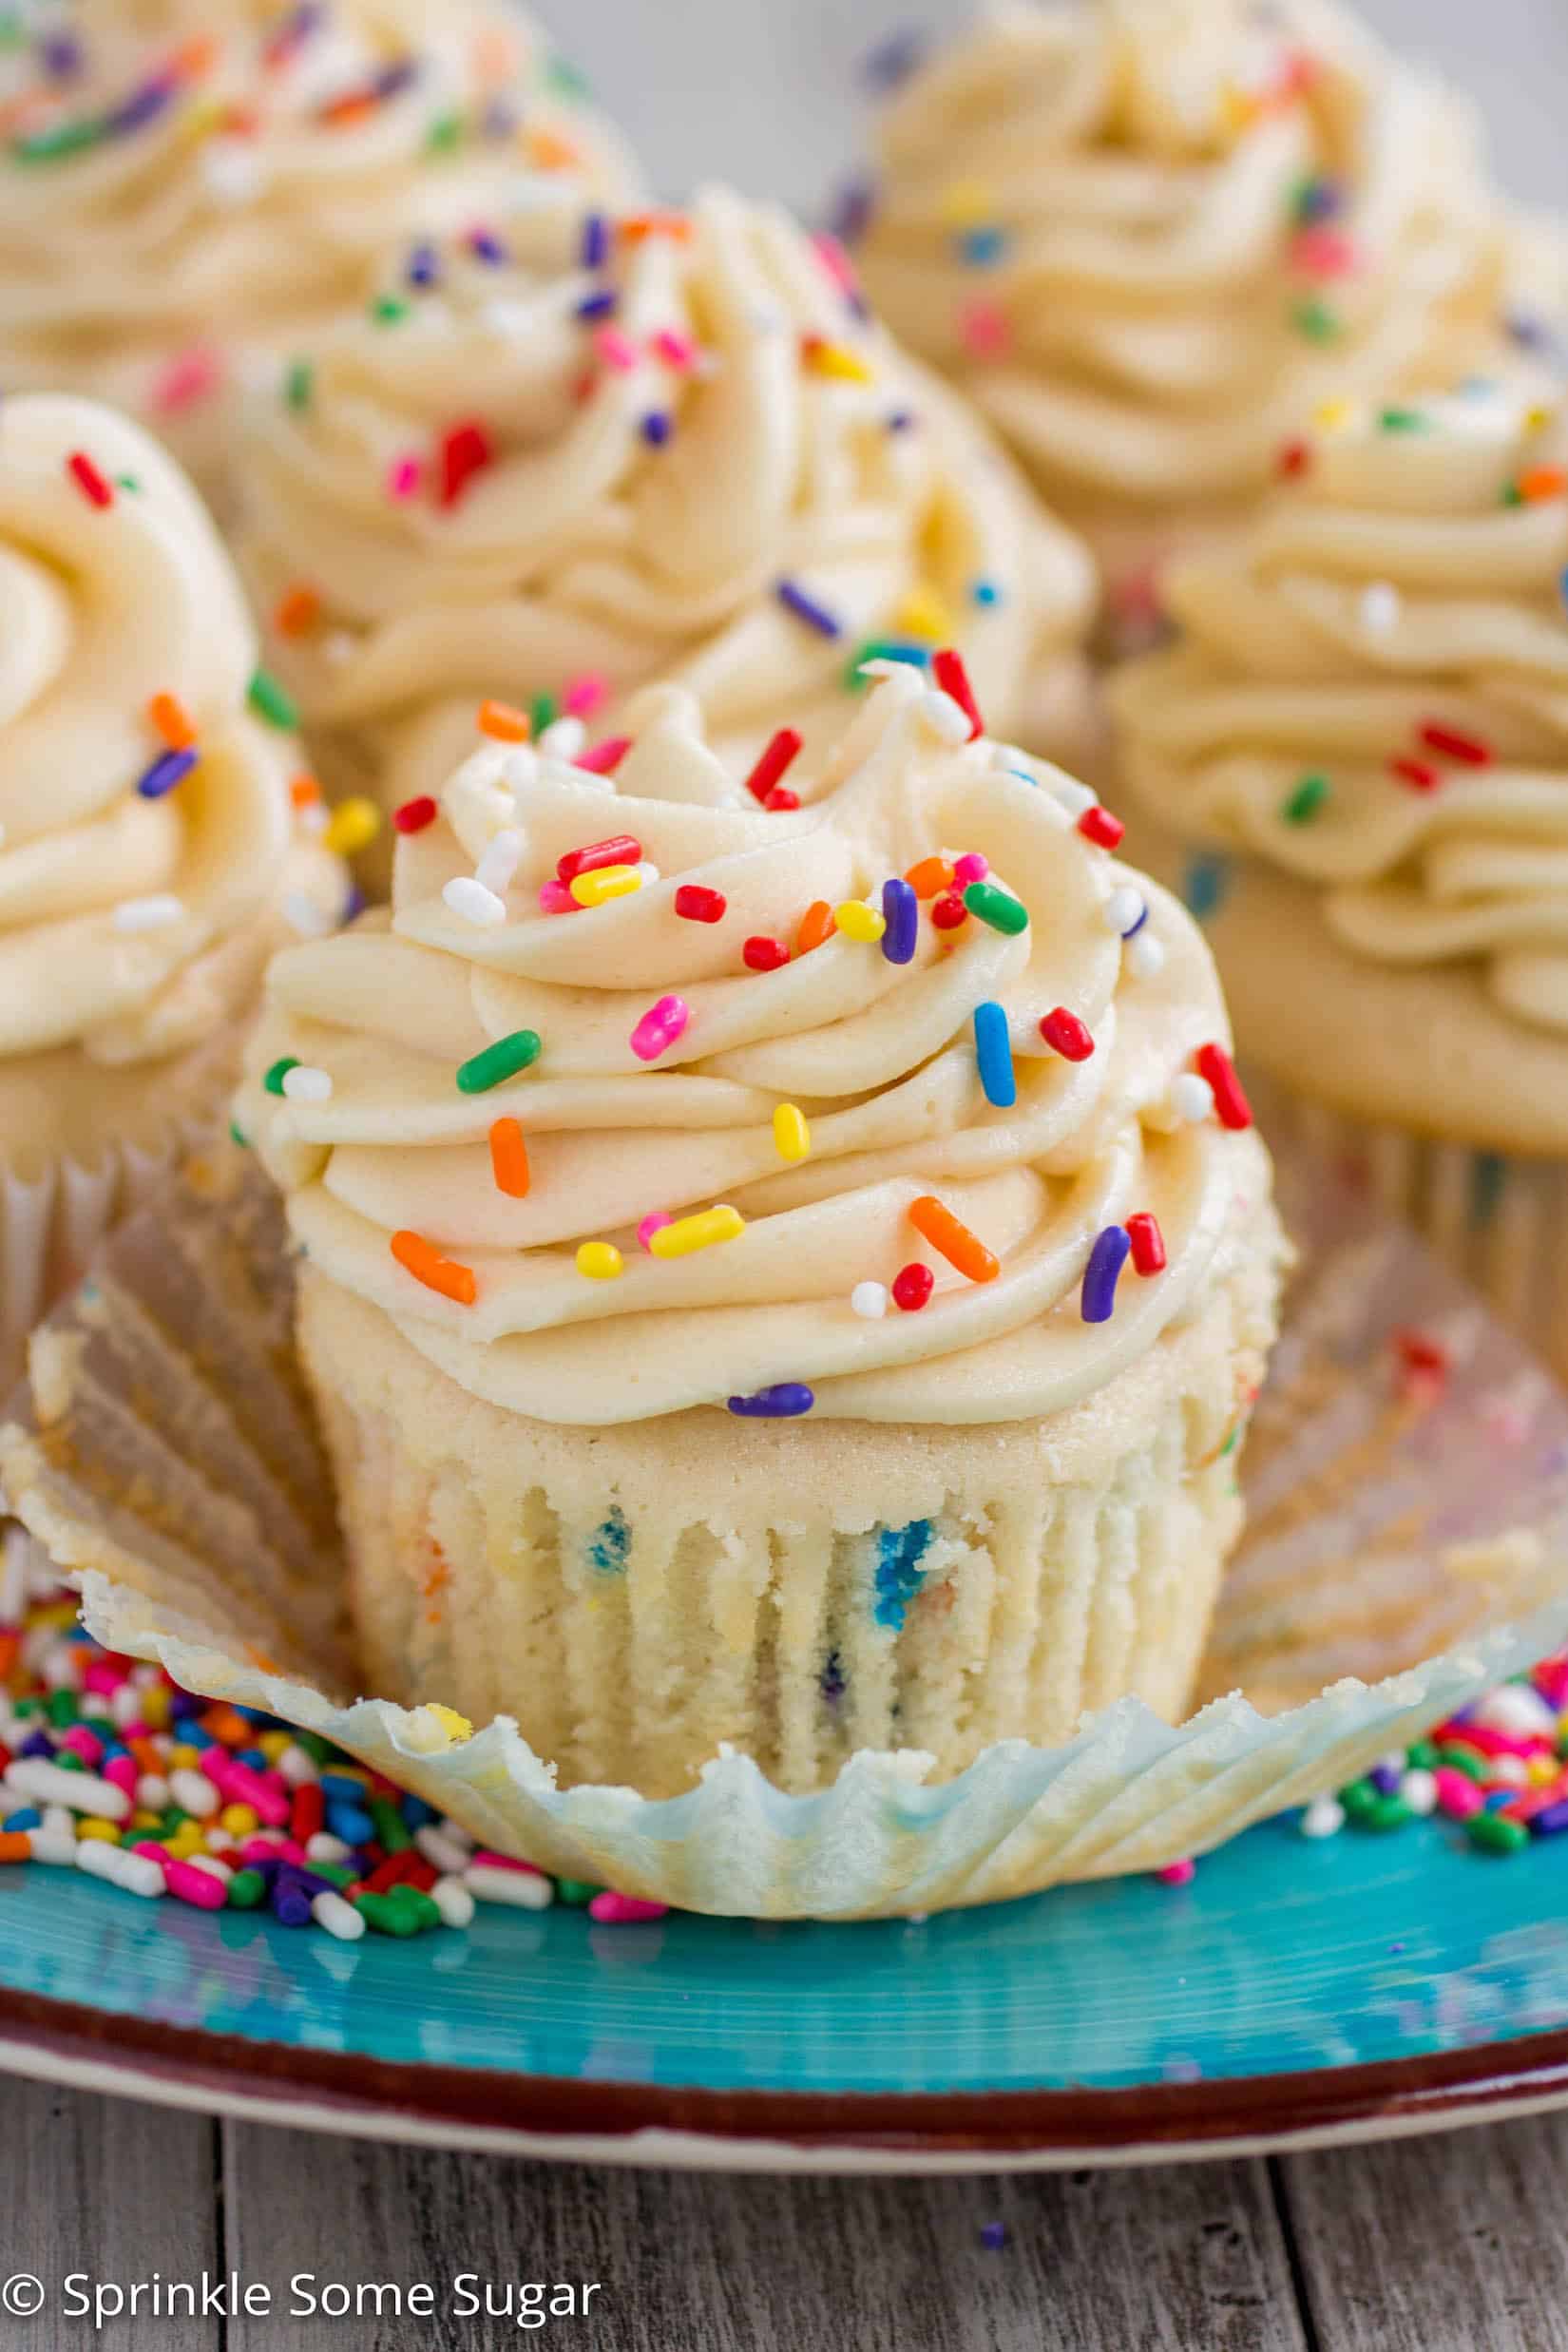  Funfetti Cupcakes with Cake Batter Frosting - My favorite basic fluffy vanilla cupcakes chock full of sprinkles and topped with a creamy cake batter frosting!